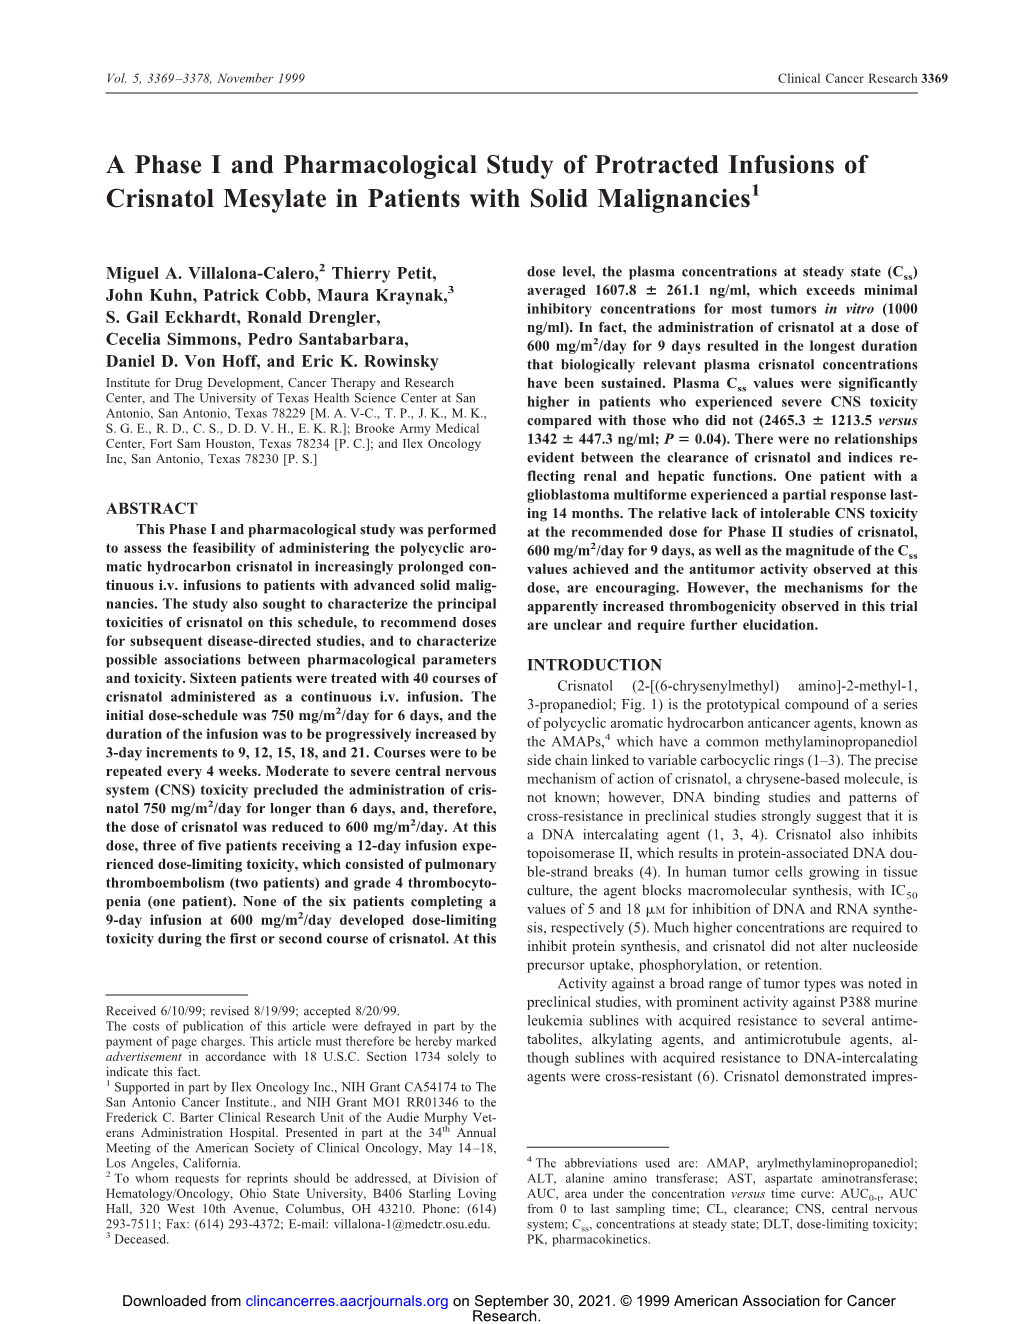 A Phase I and Pharmacological Study of Protracted Infusions of Crisnatol Mesylate in Patients with Solid Malignancies1